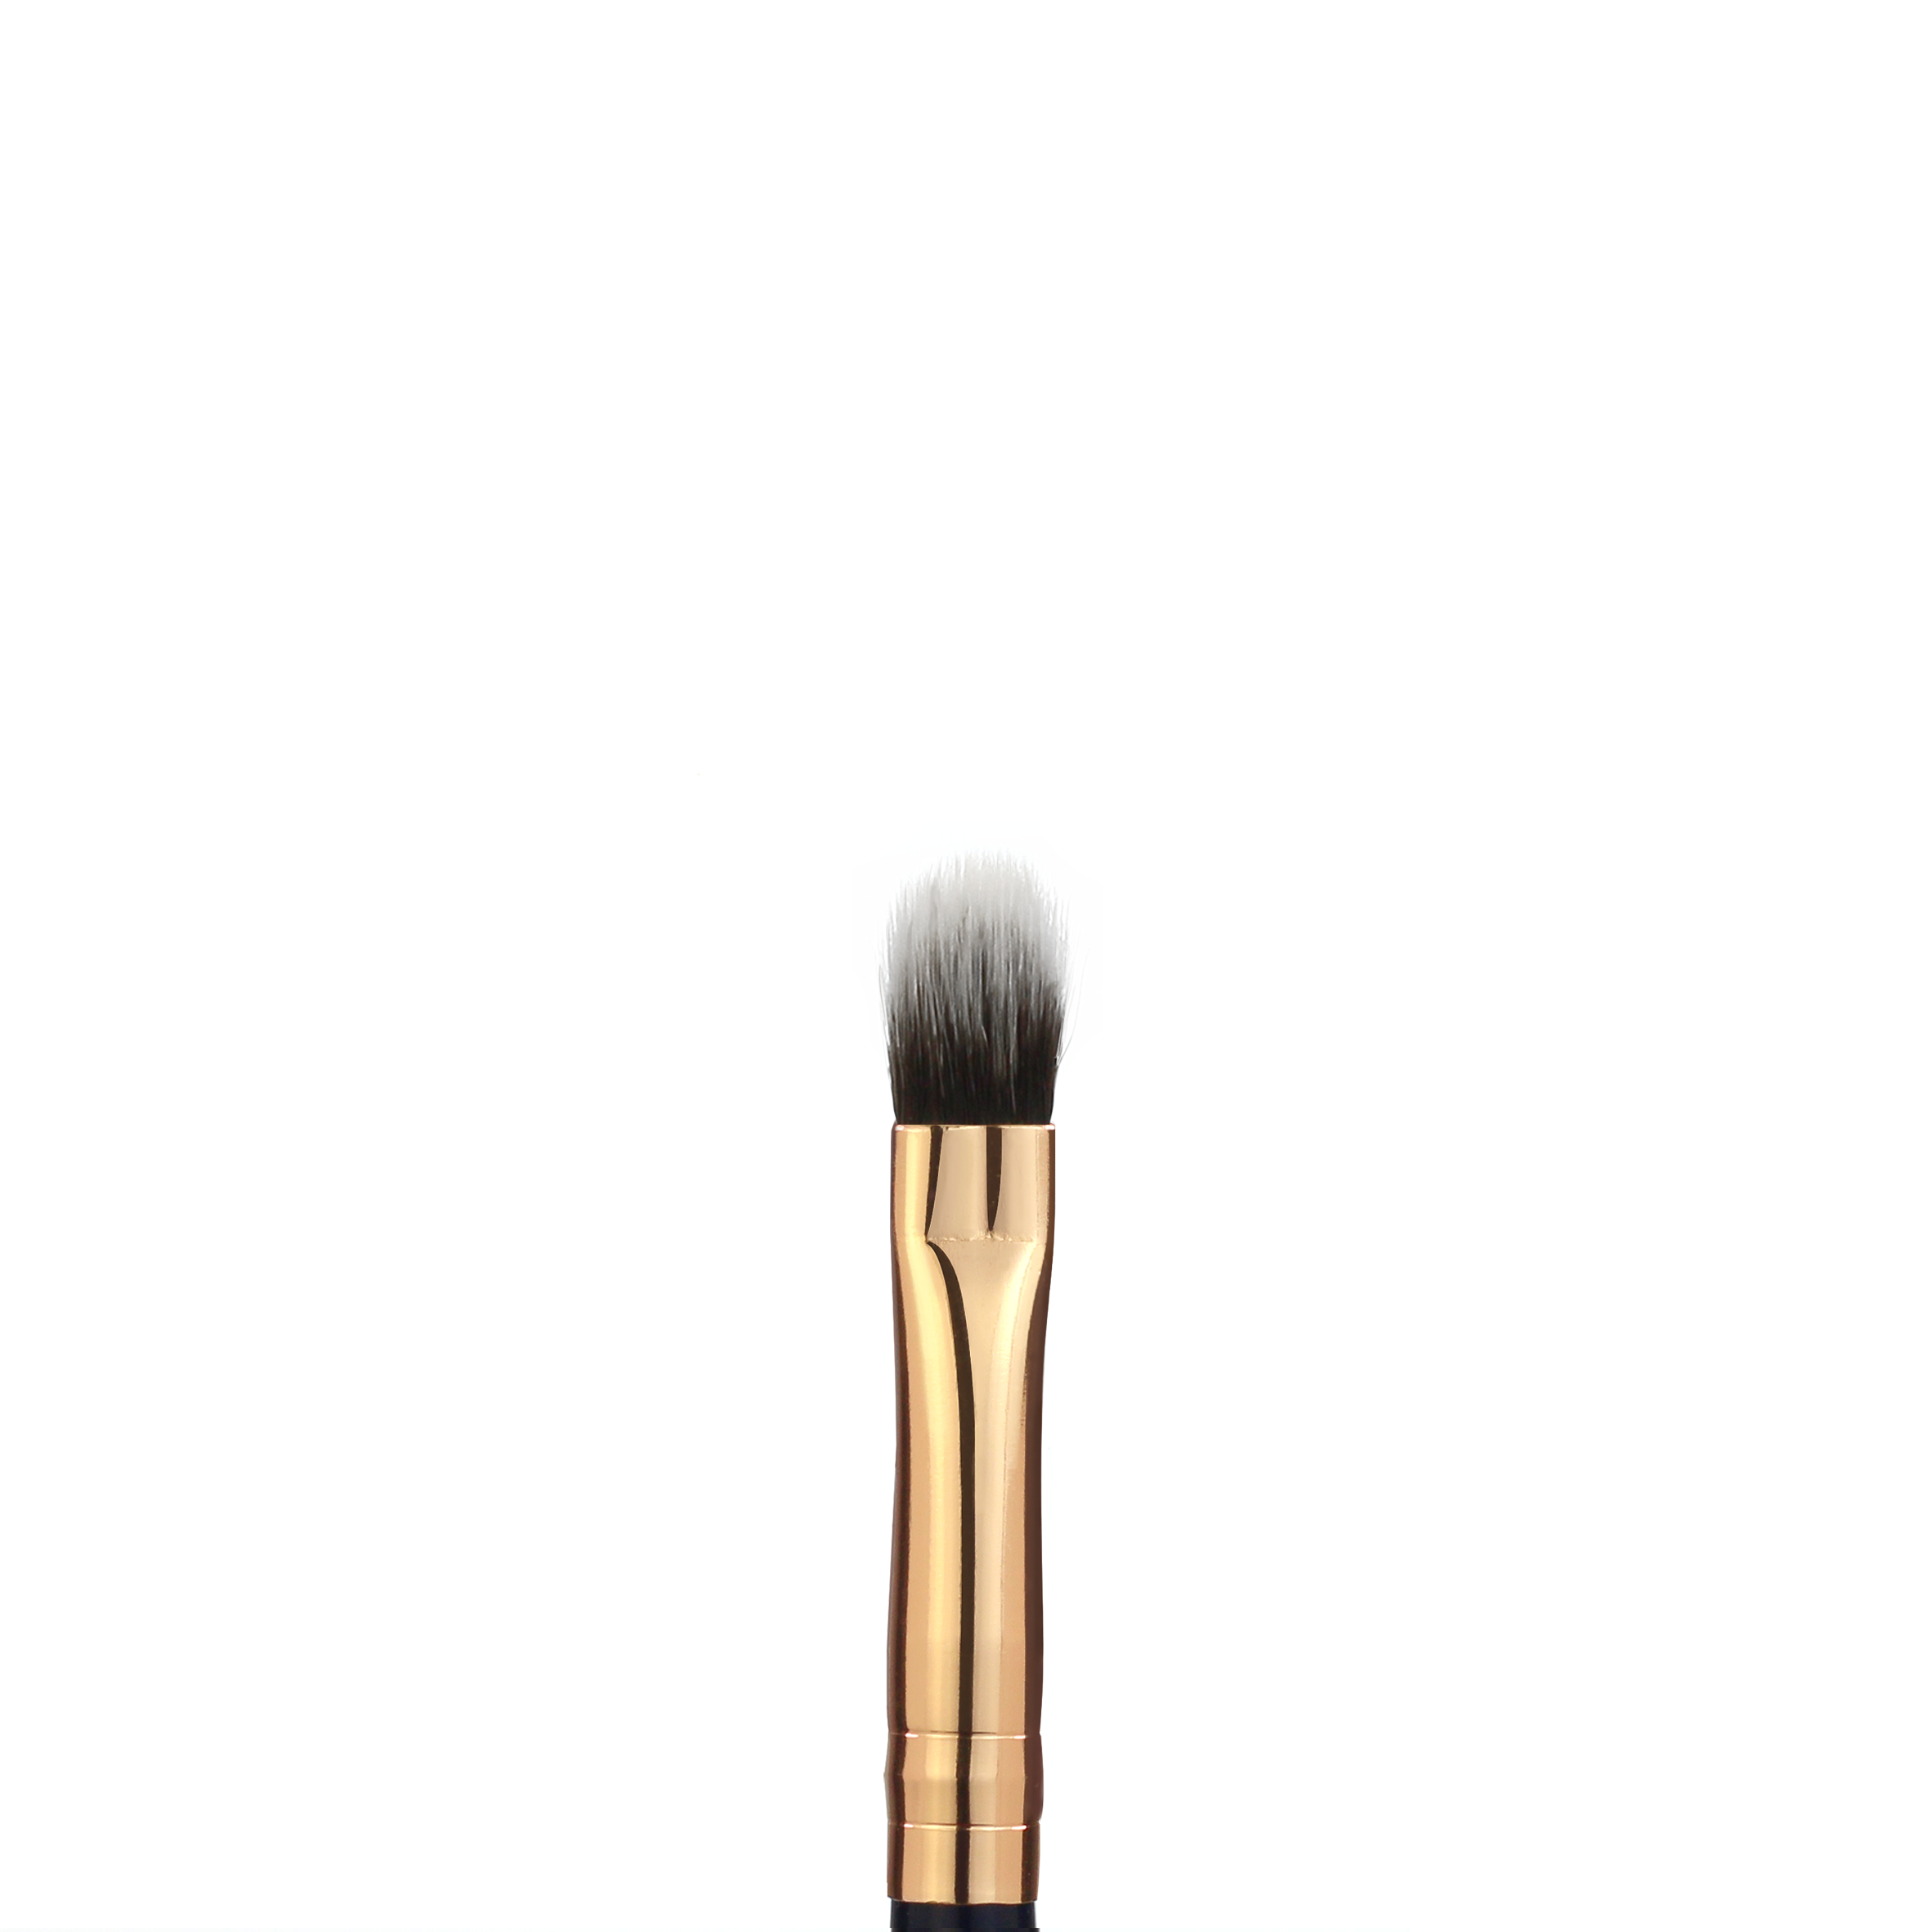 Detail Shader - 13rushes - Singapore's best makeup brushes